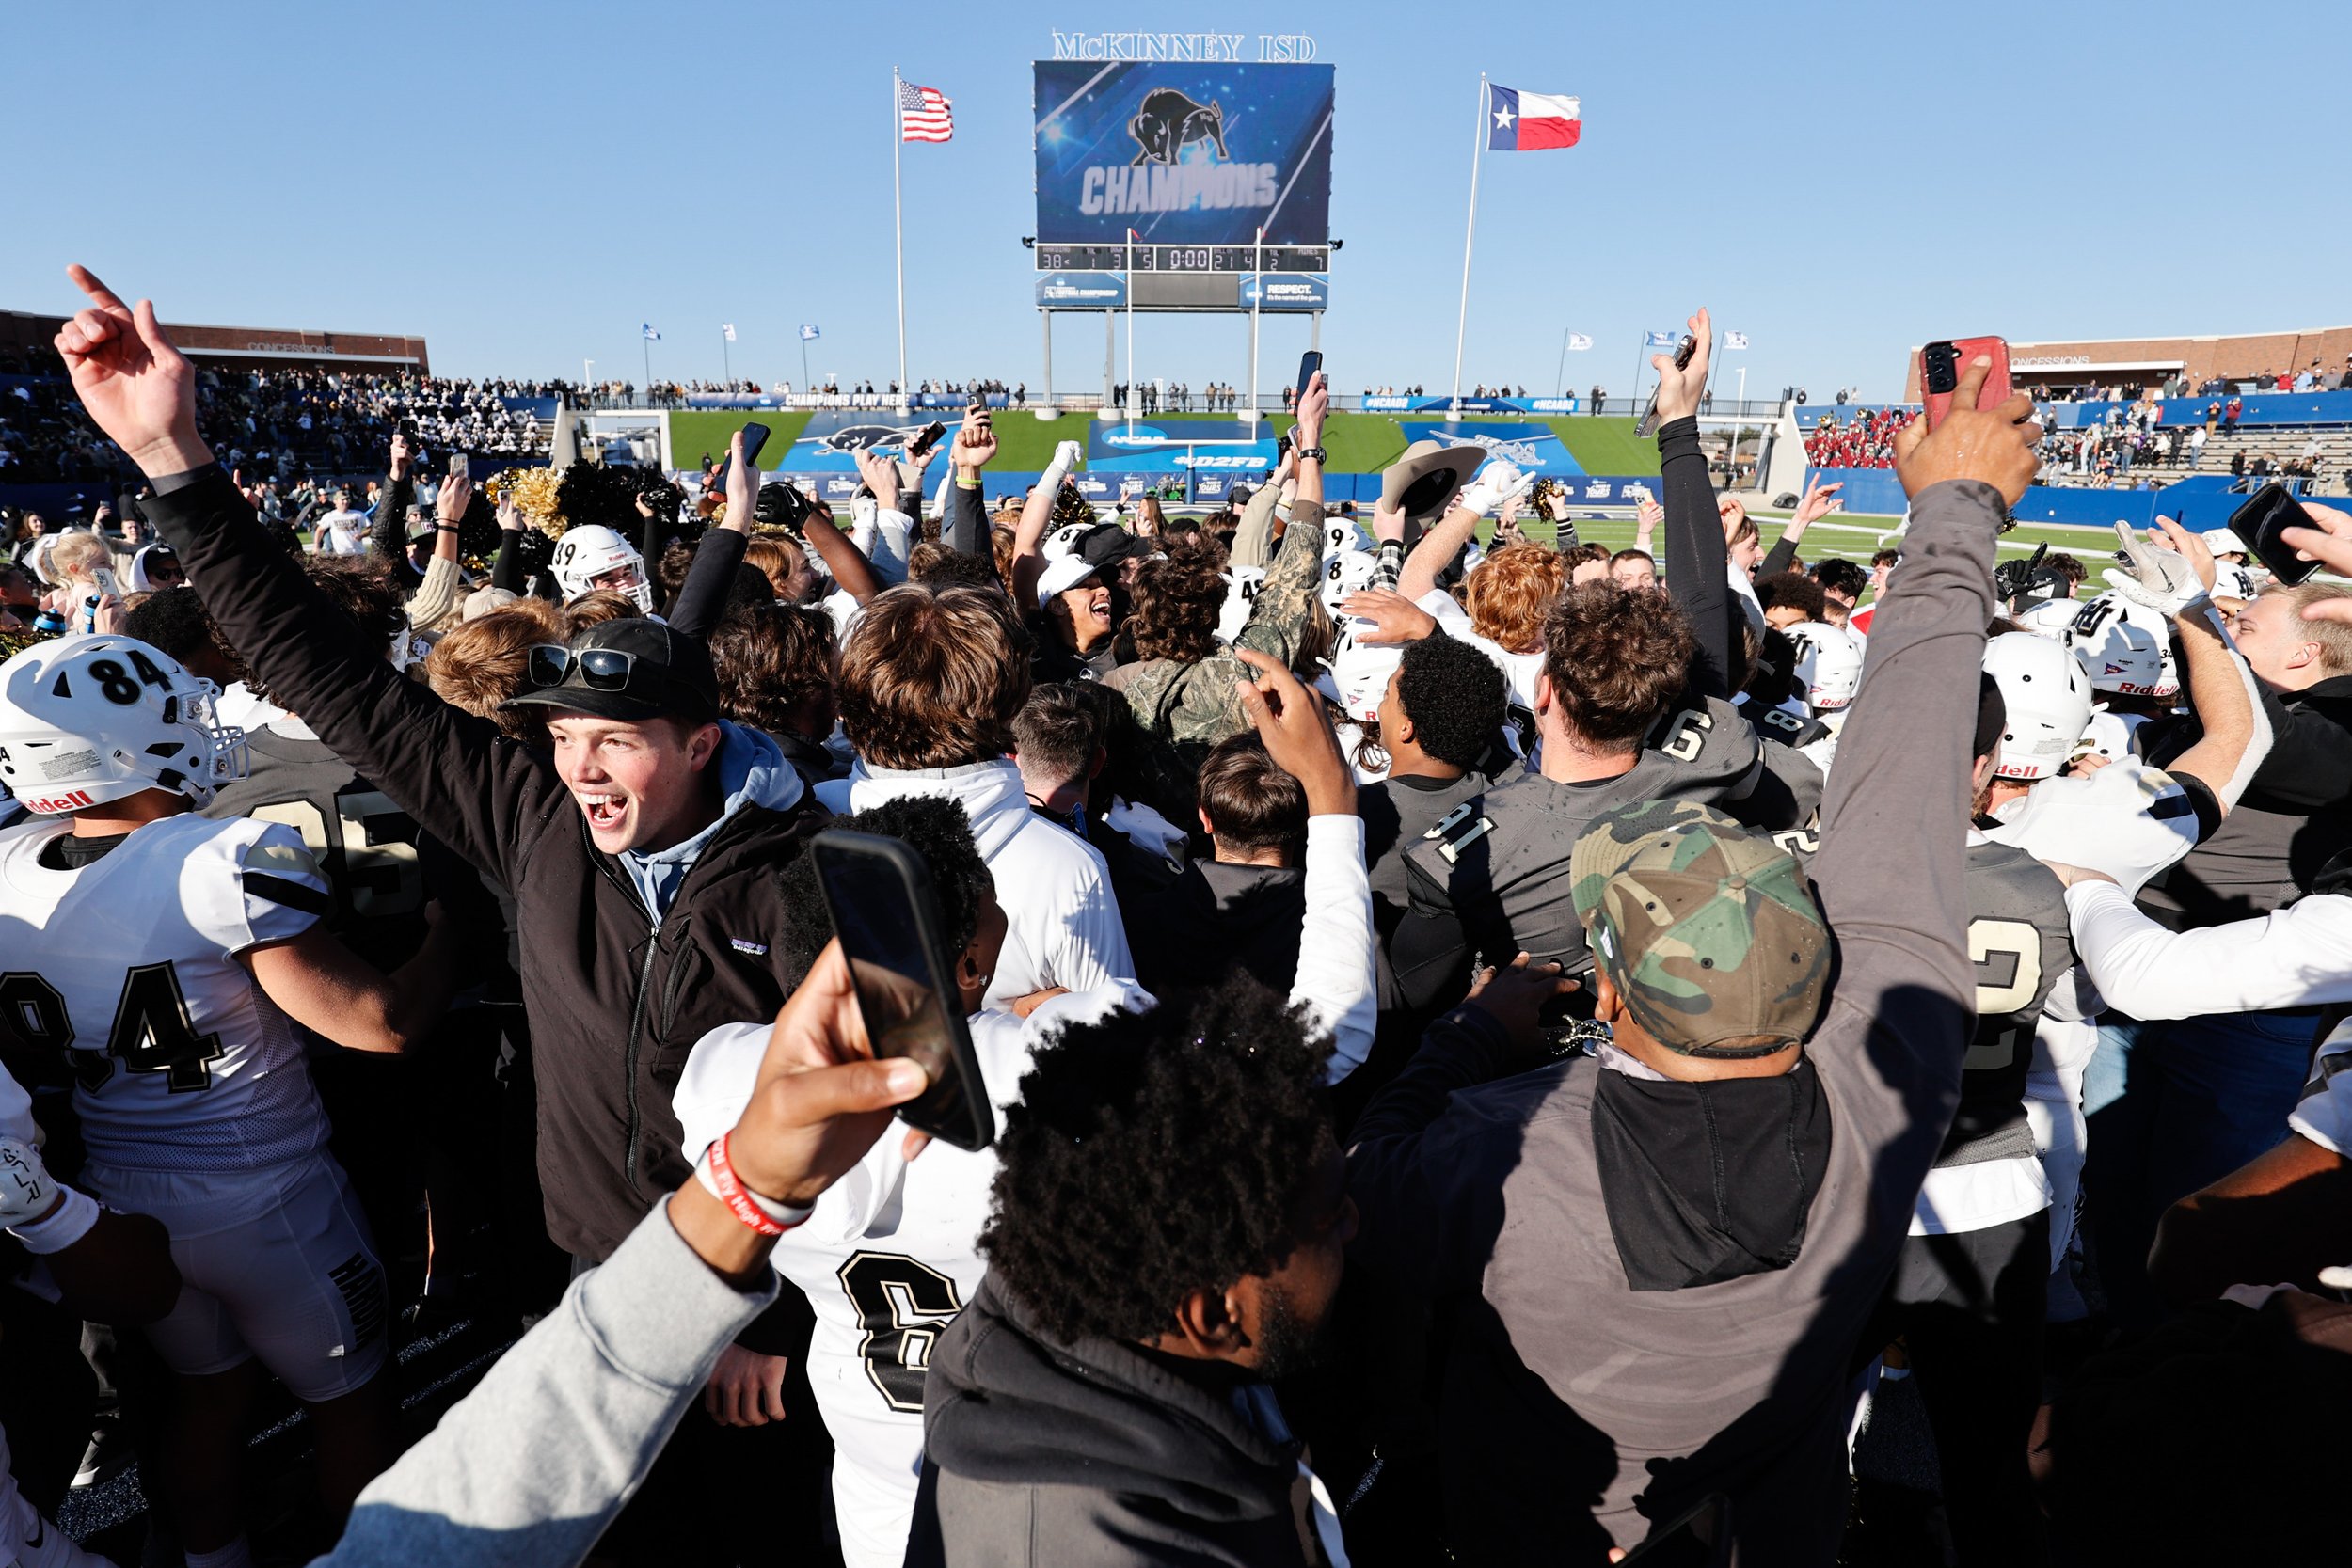  MCKINNEY, TEXAS - DECEMBER 16: Fans rush the field after the Harding Bisons beat the Colorado School of Mines Orediggers to win the Division II Football Championship held at McKinney ISD Stadium on December 16, 2023 in McKinney, Texas. (Photo by C. 